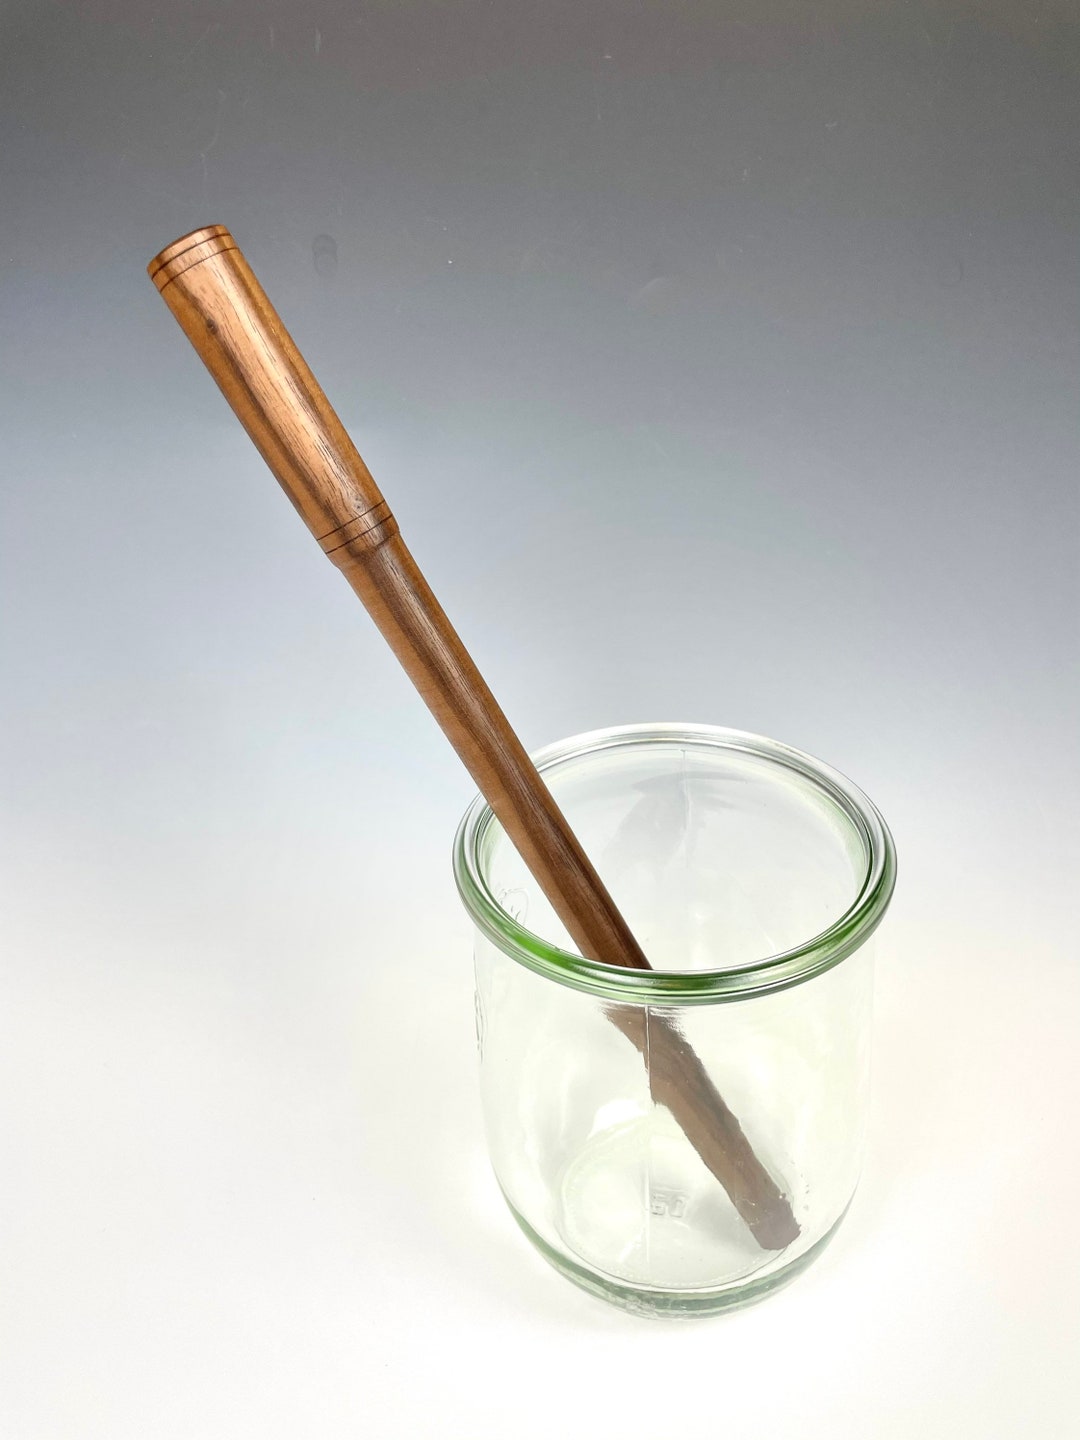 New Improved! Bamboo Sourdough Starter Stirrer Mixing Spoon